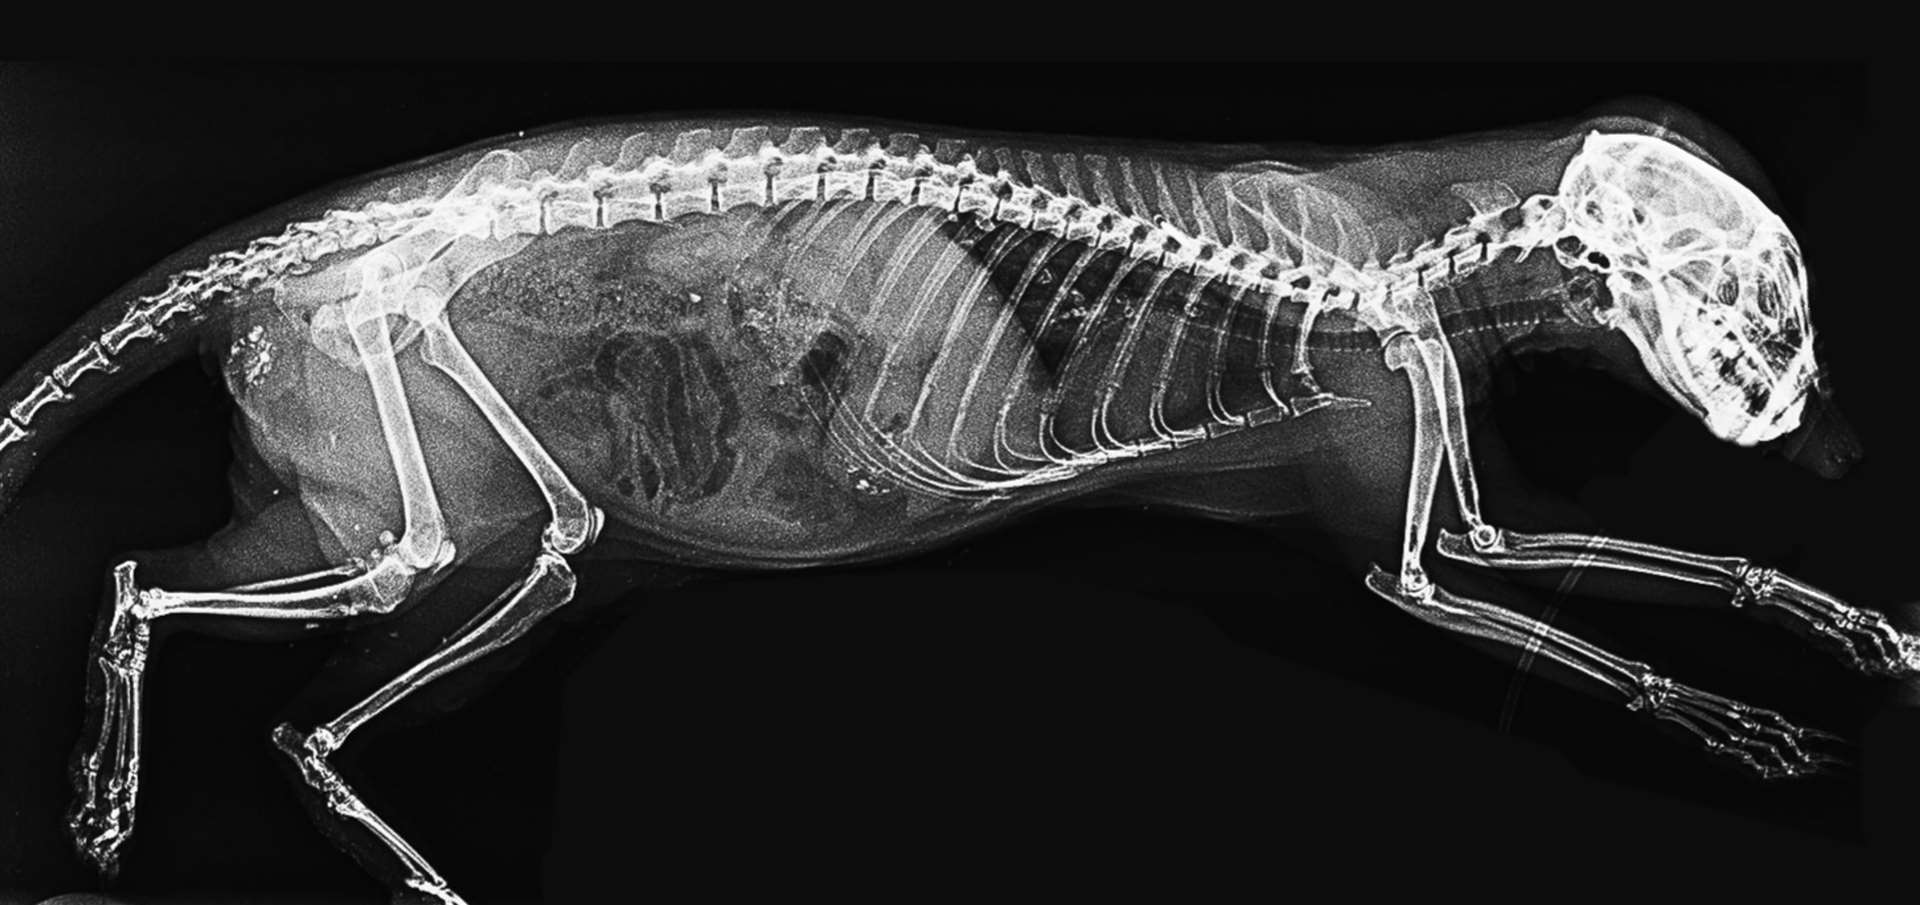 An X-ray of a meerkat (London Zoo/PA)